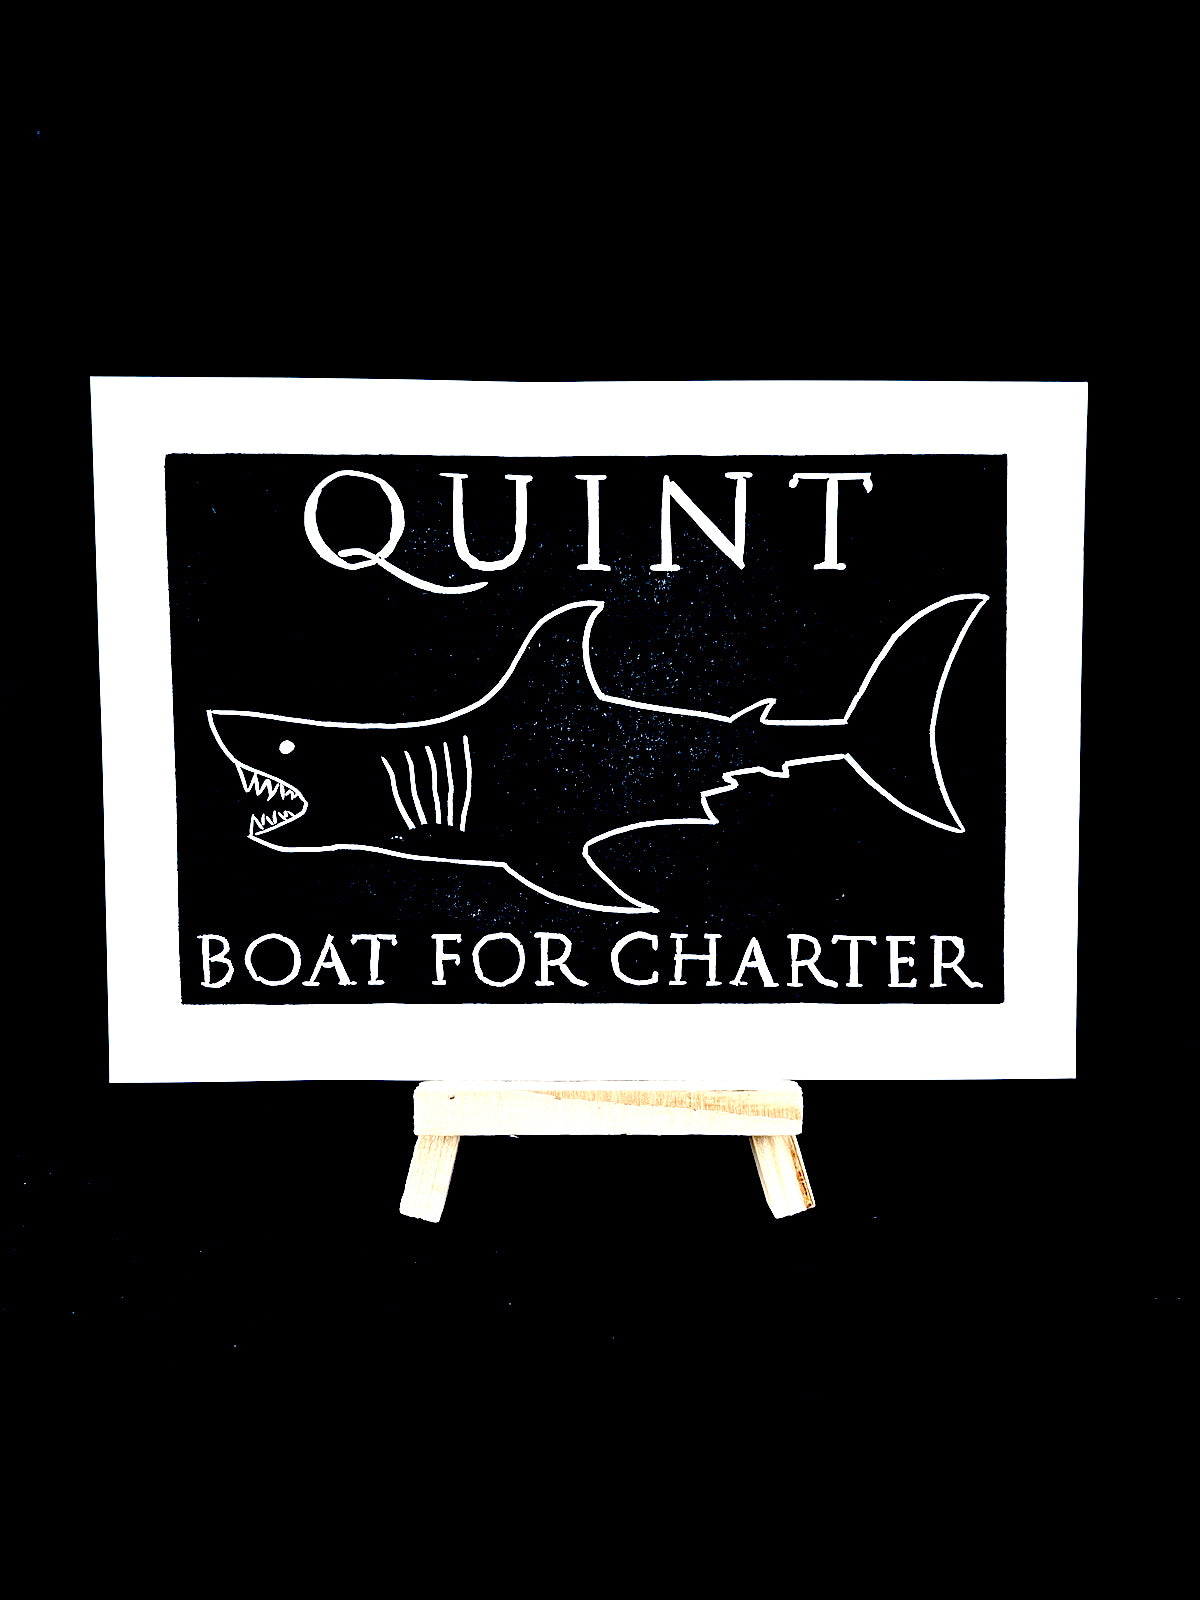 Quint - Boat for Charter (JAWS)